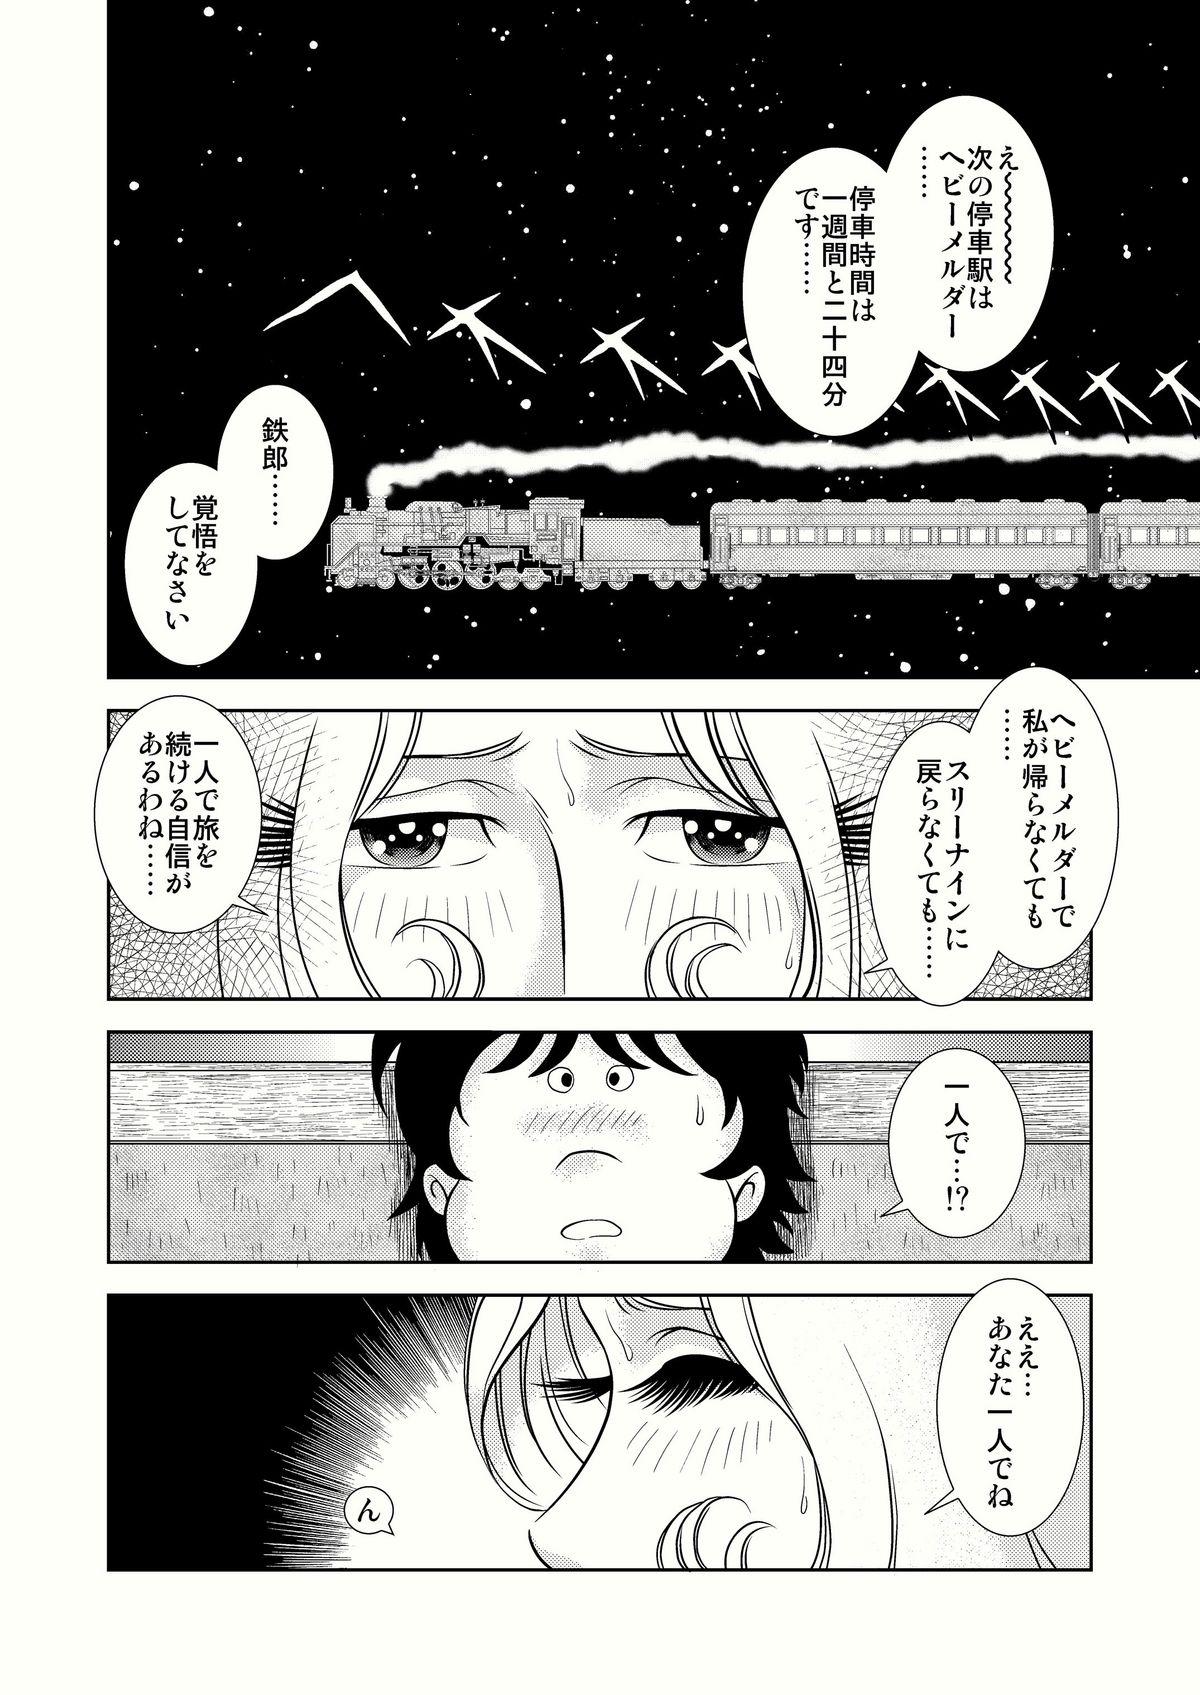 Submissive Maetel Story 4 - Galaxy express 999 Kashima - Picture 2